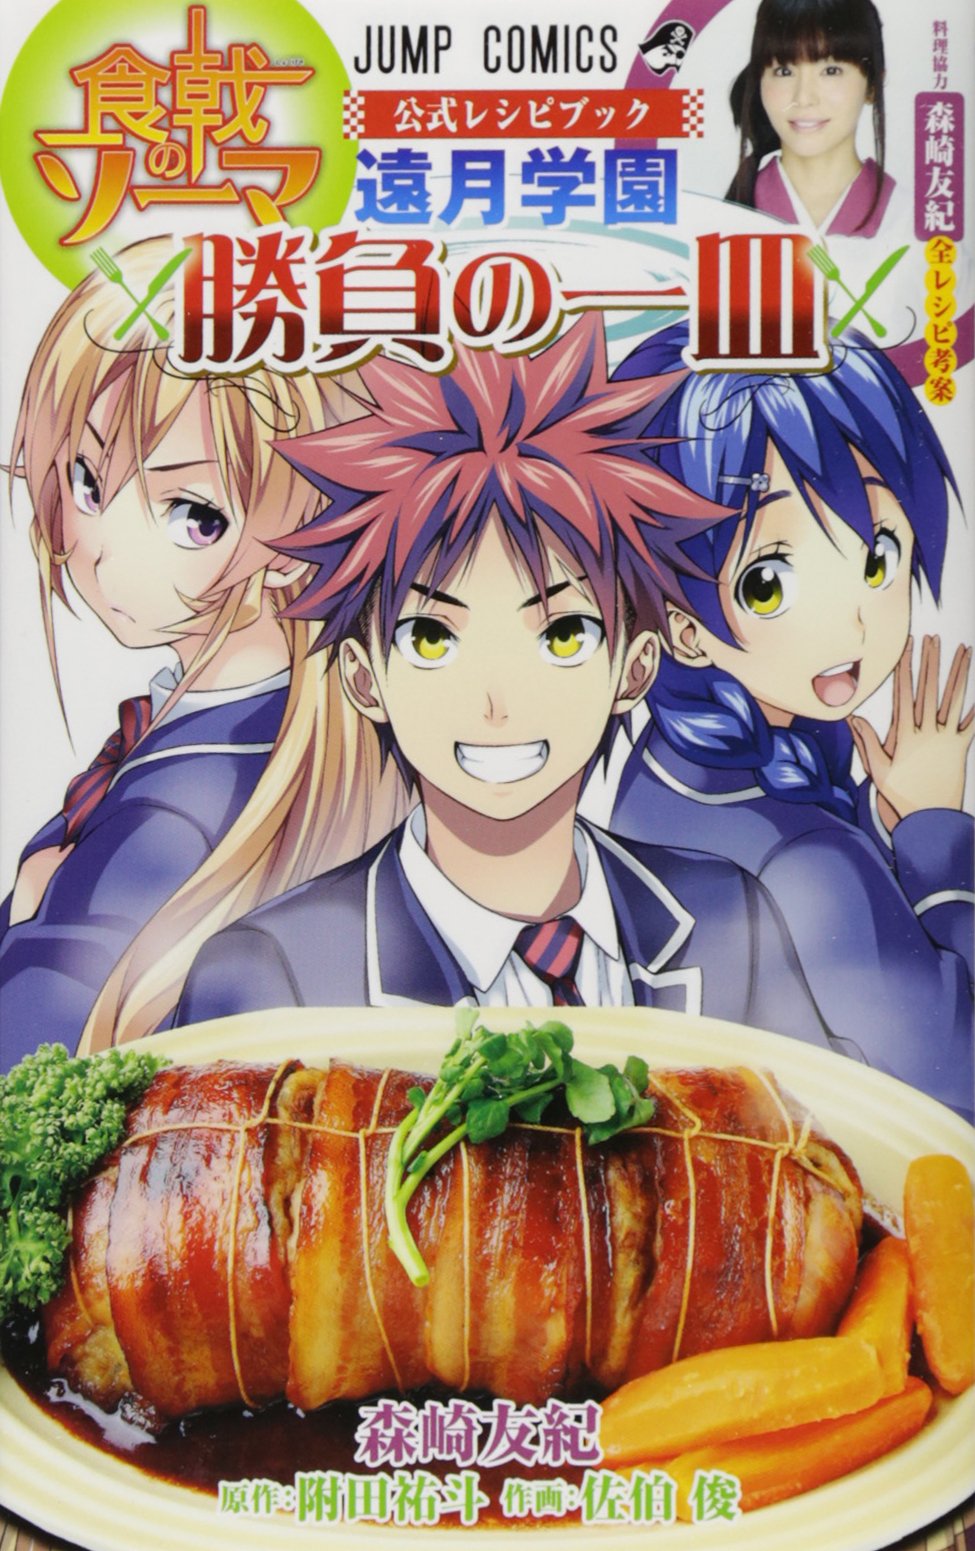 Food Manga: Where Culture, Conflict And Cooking All Collide